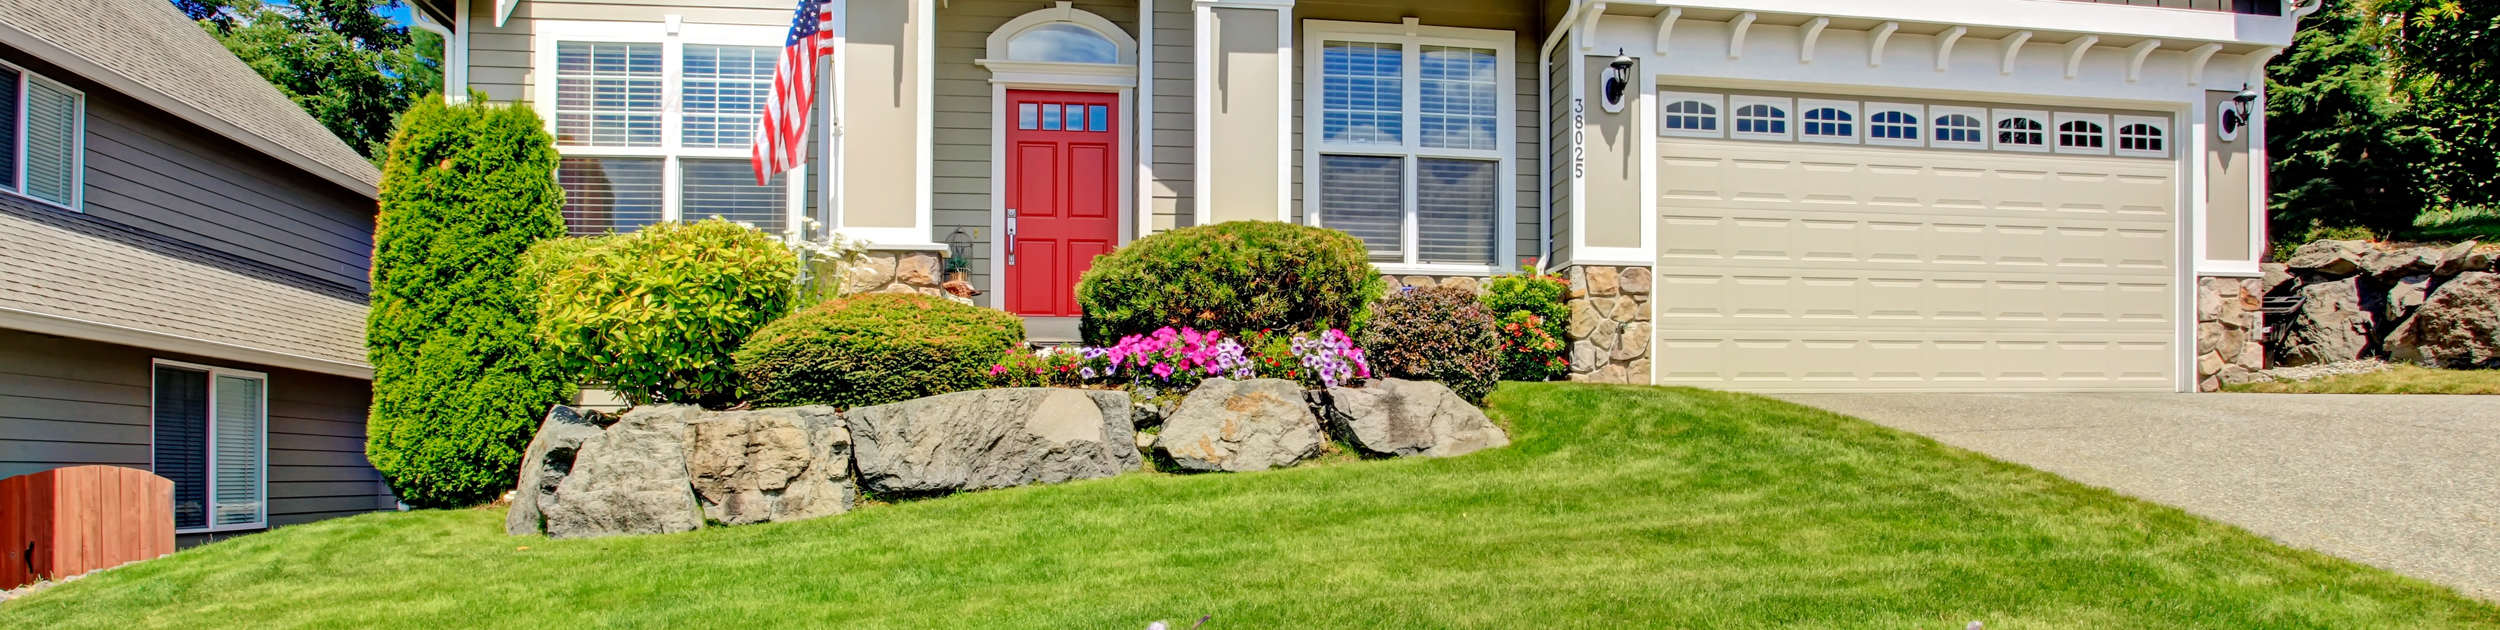 luxury home with Spring bushes blooming outside